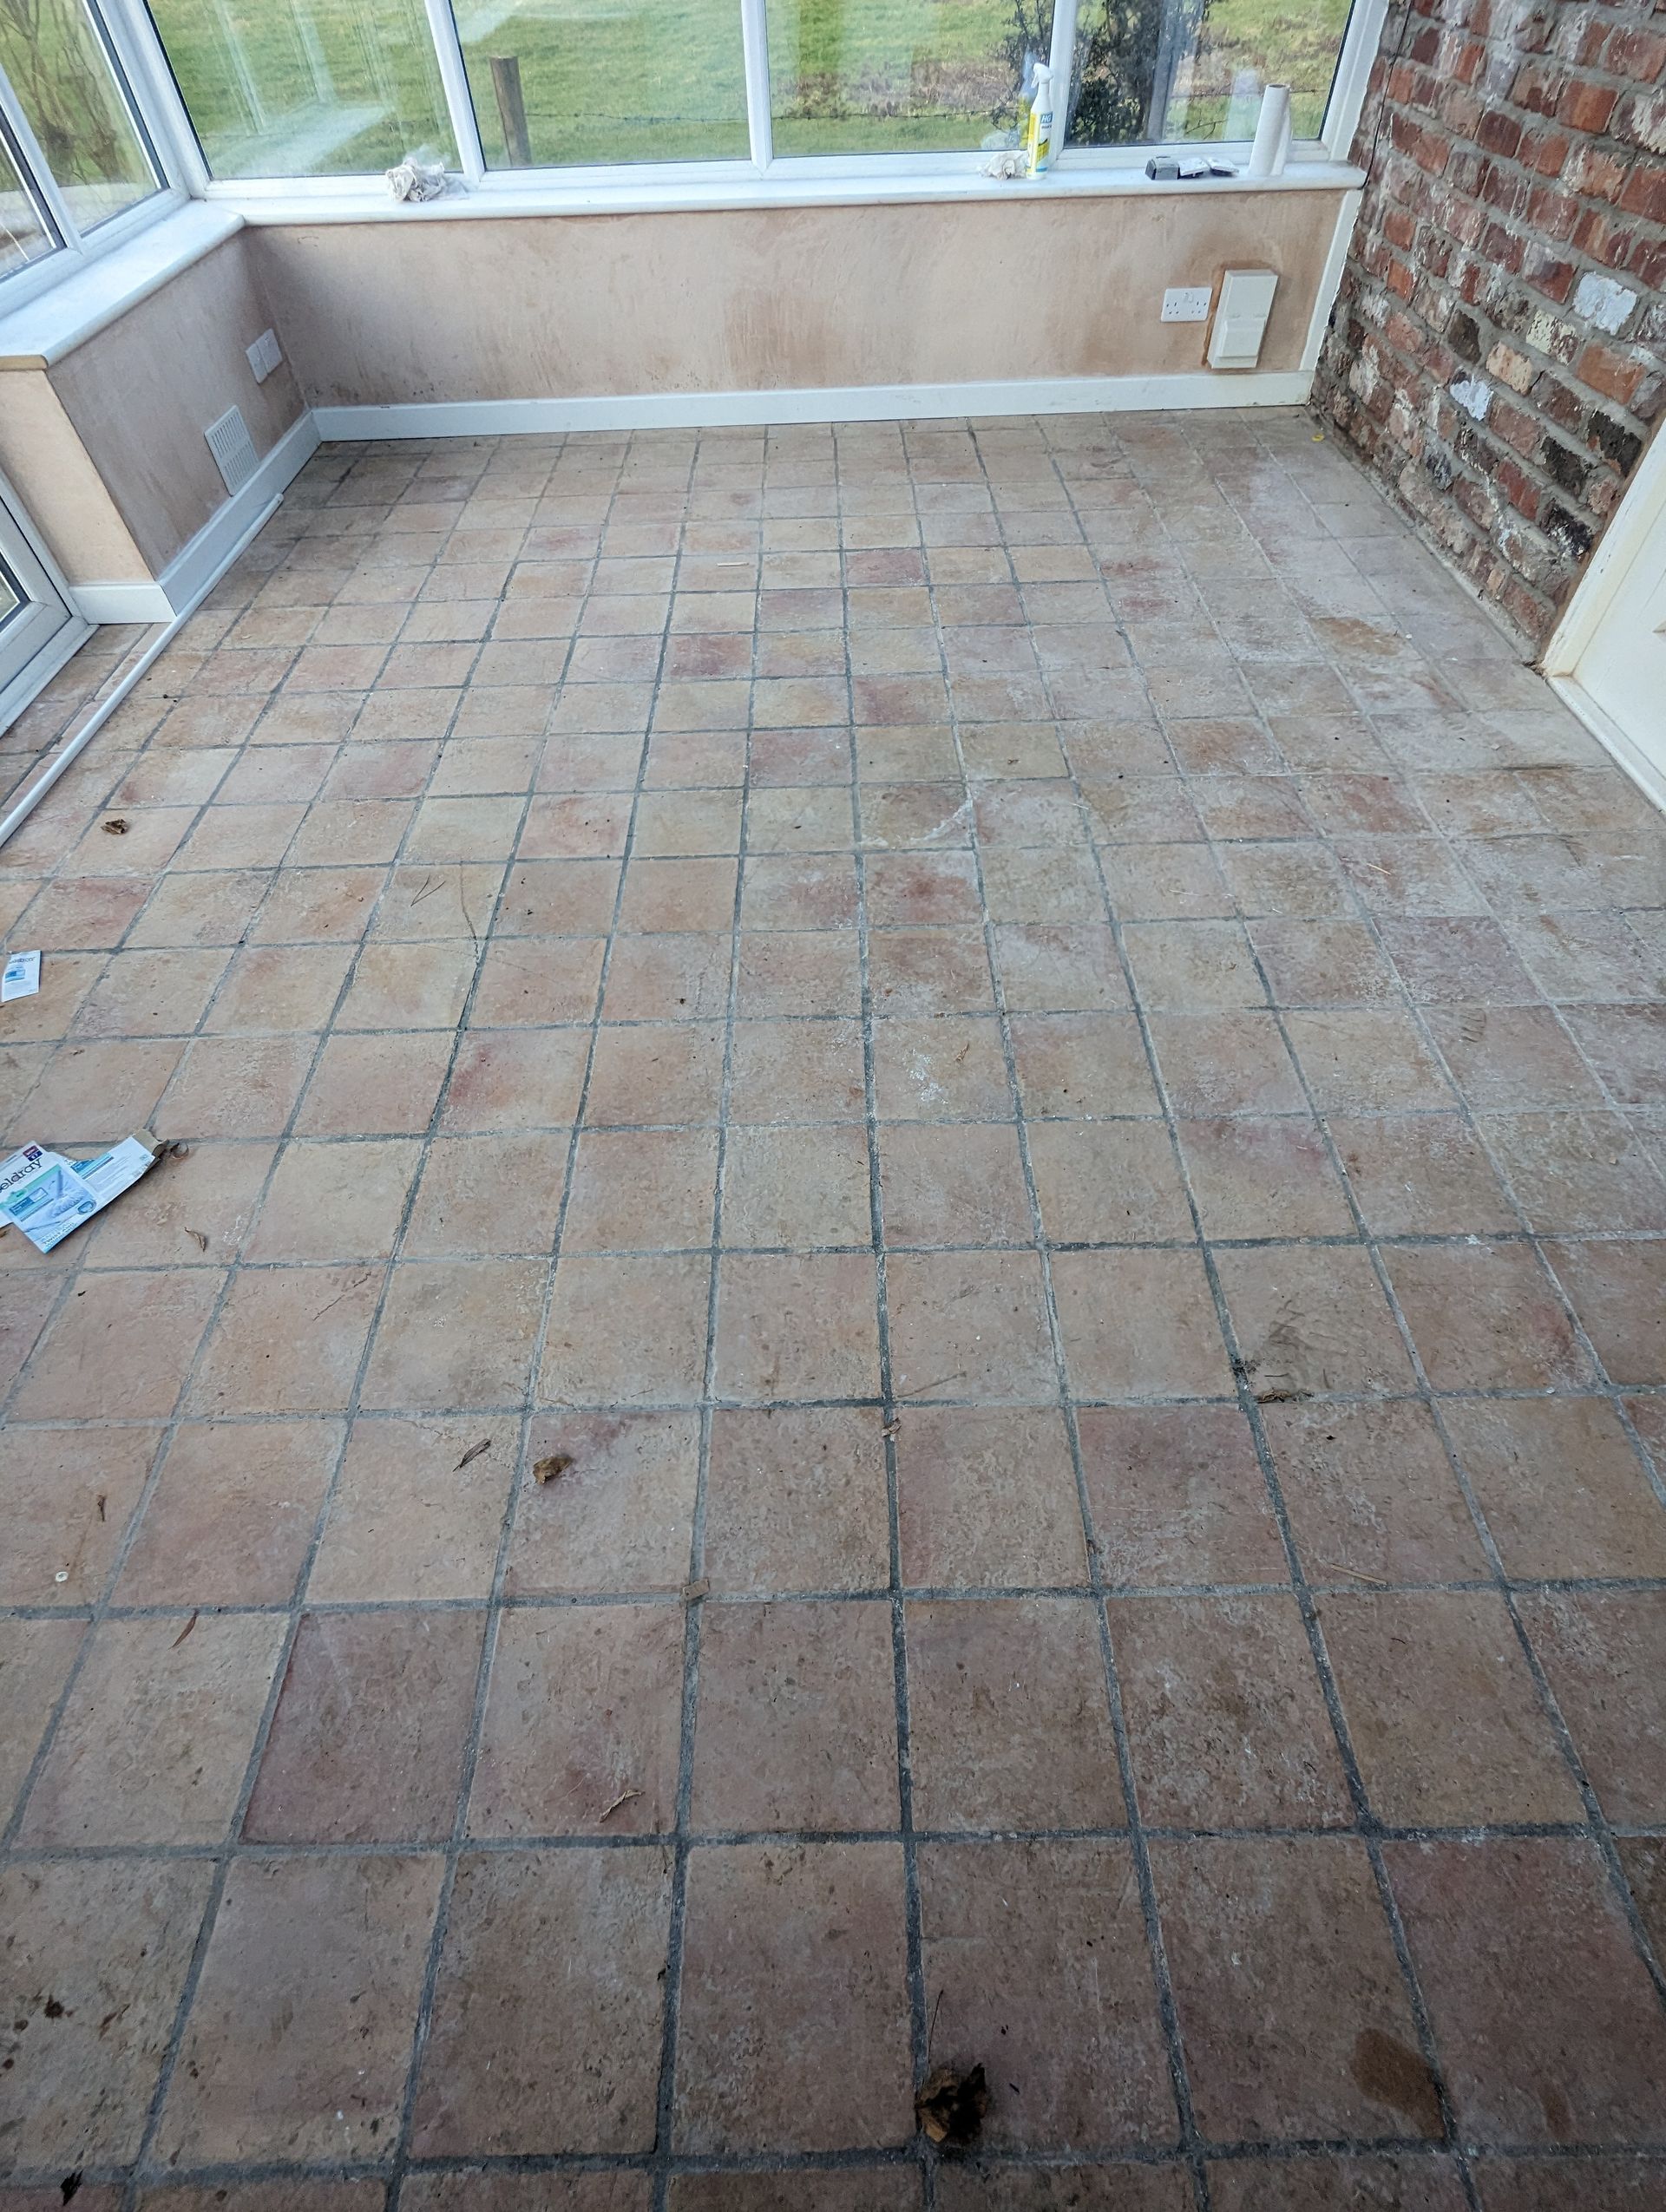 TERRACOTTA TILES AND GROUT DEEP CLEANING AND SEALING IN KNUTSFORD, CHESHIRE, Manchester